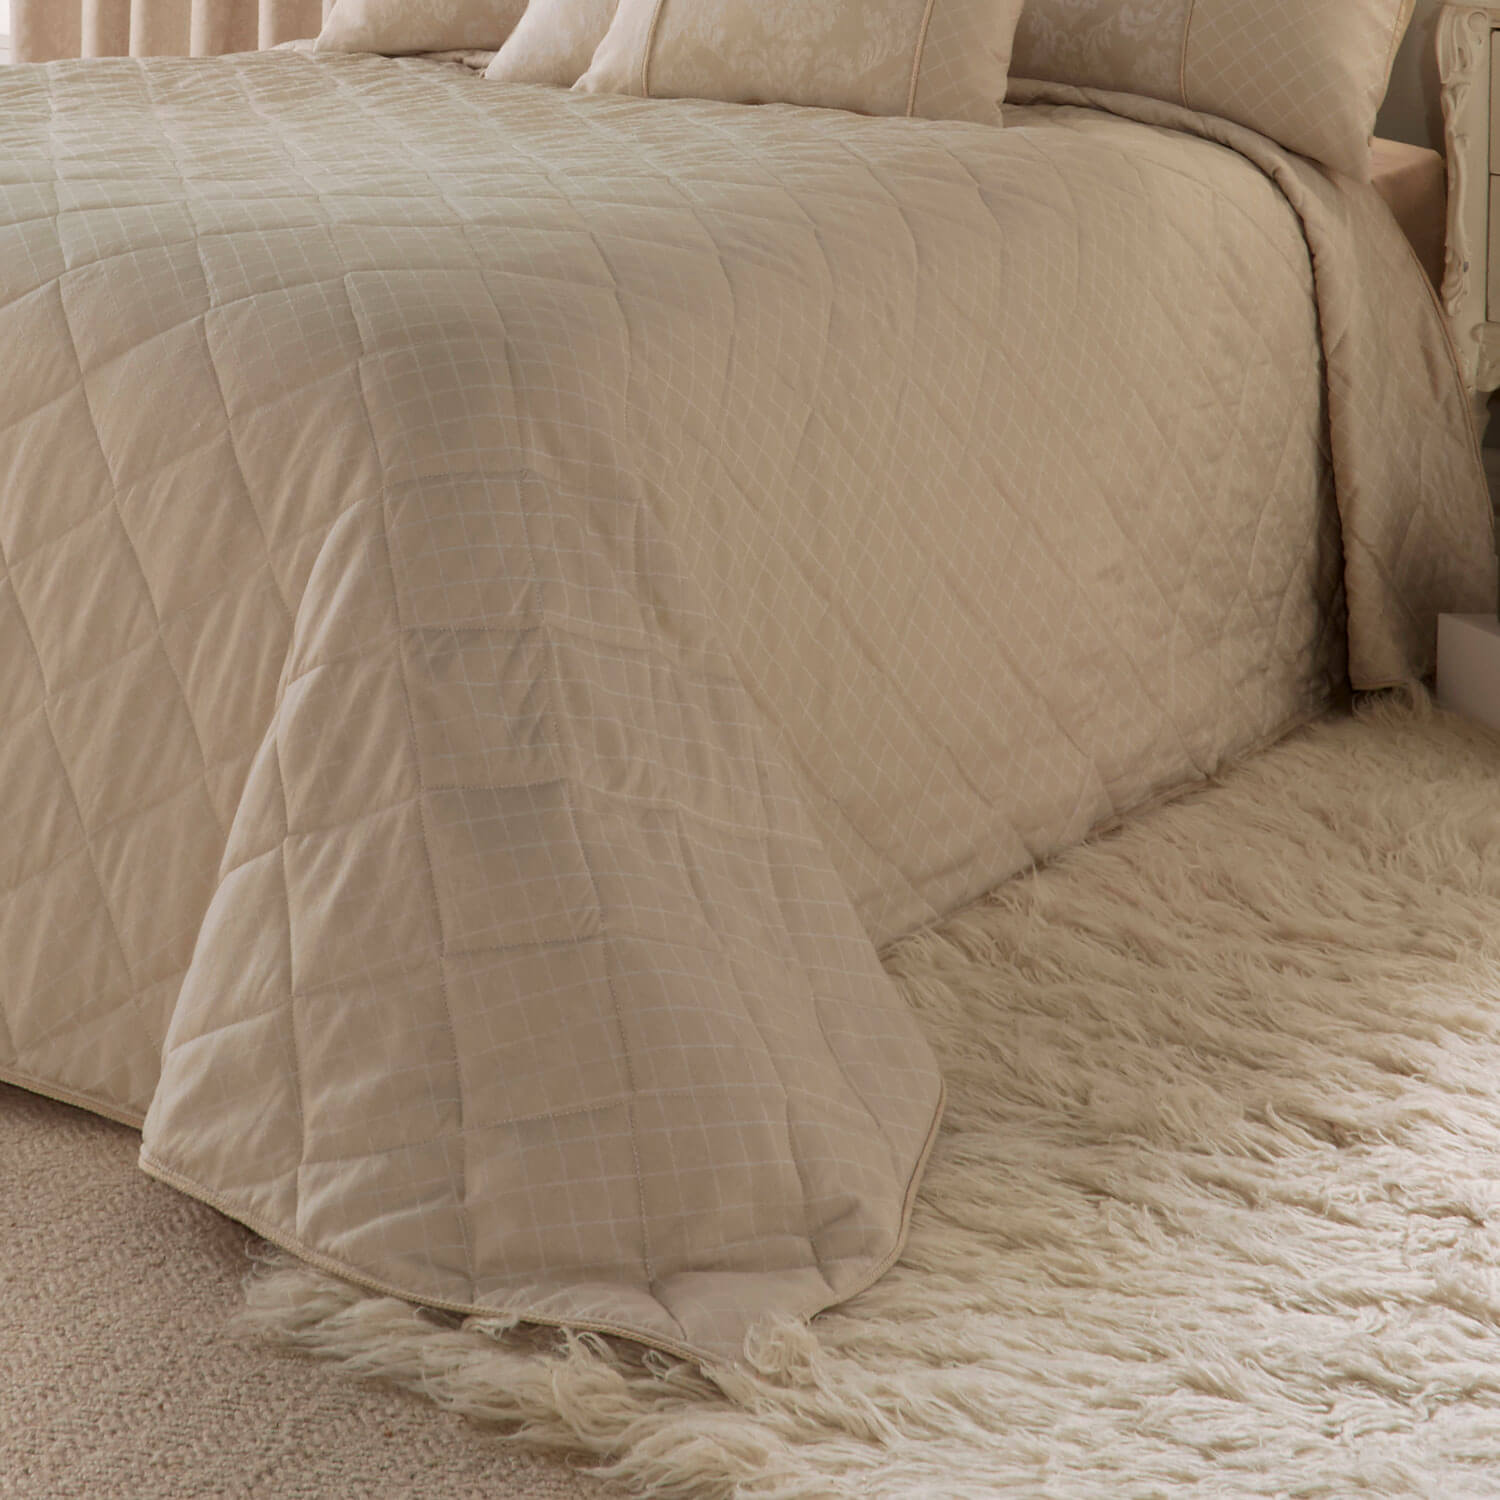 The Home Collection Florence Bedspread - 220 x 240cm 1 Shaws Department Stores